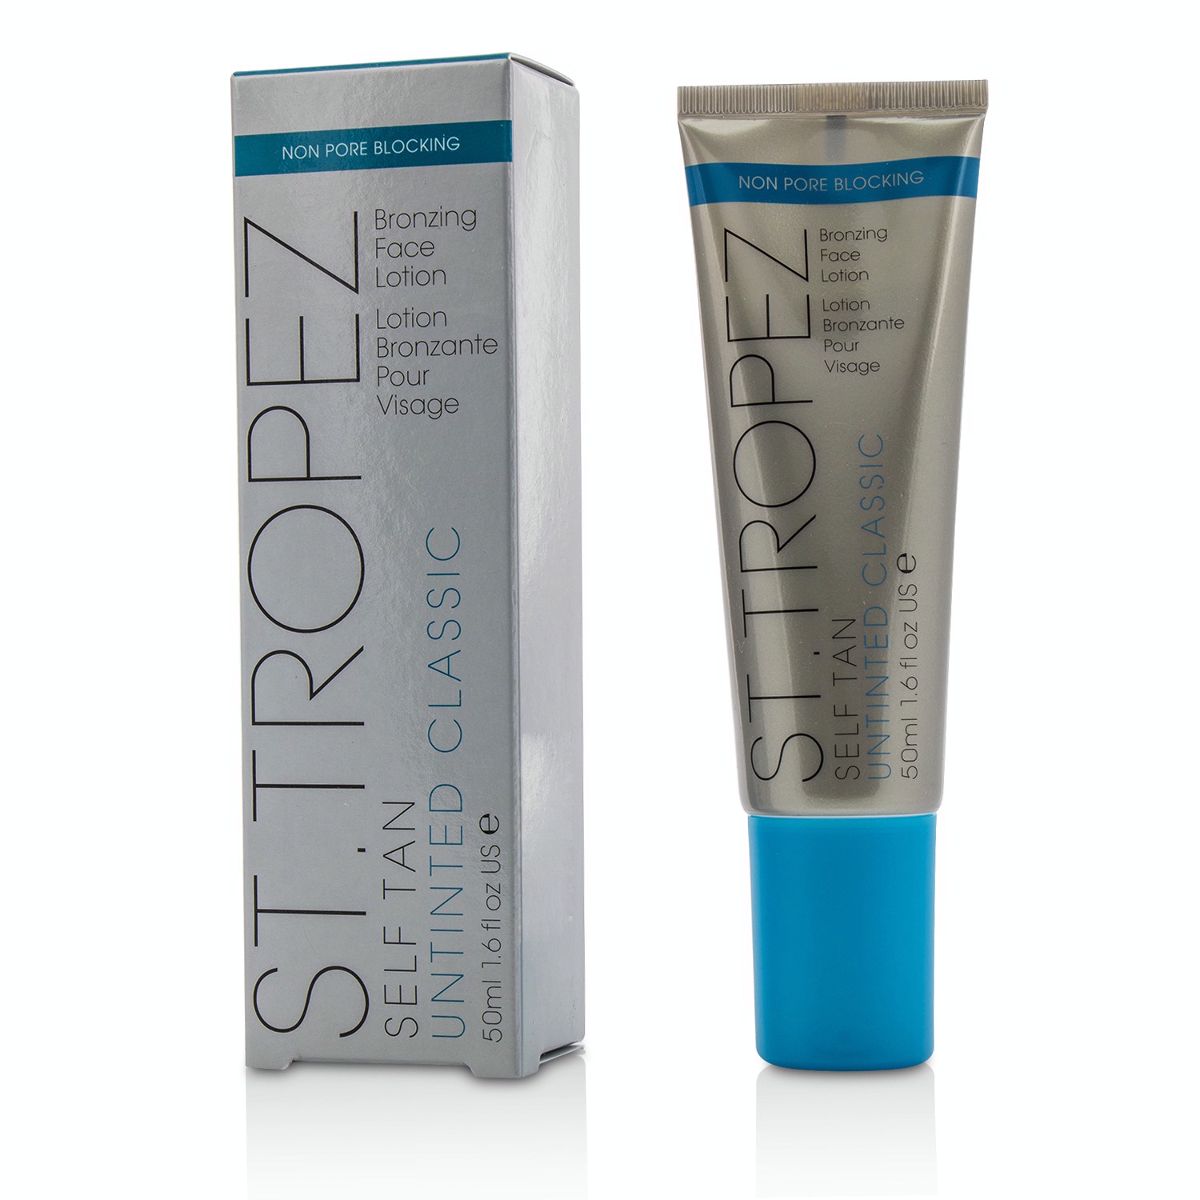 Self Tan Untinted Classic Bronzing Face Lotion St. Tropez Image